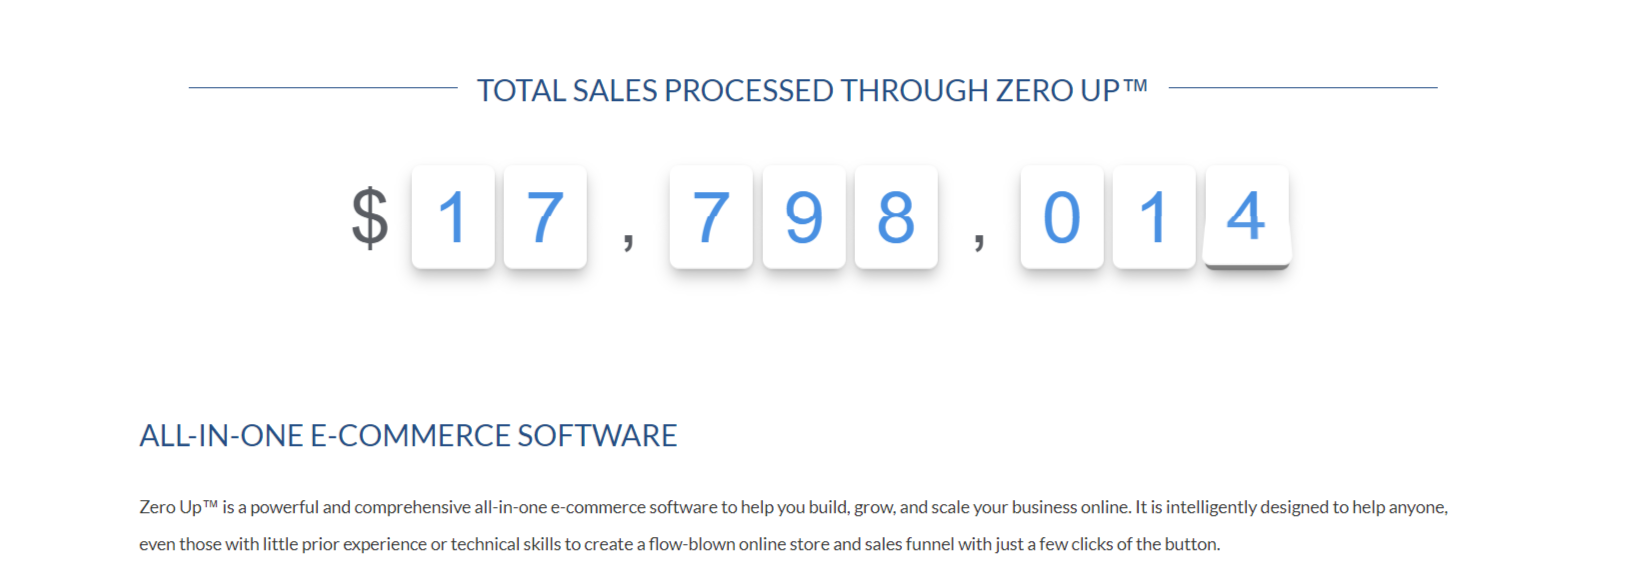 ZeroUp Review- TOTAL SALES PROCESSED THROUGH ZERO UP™